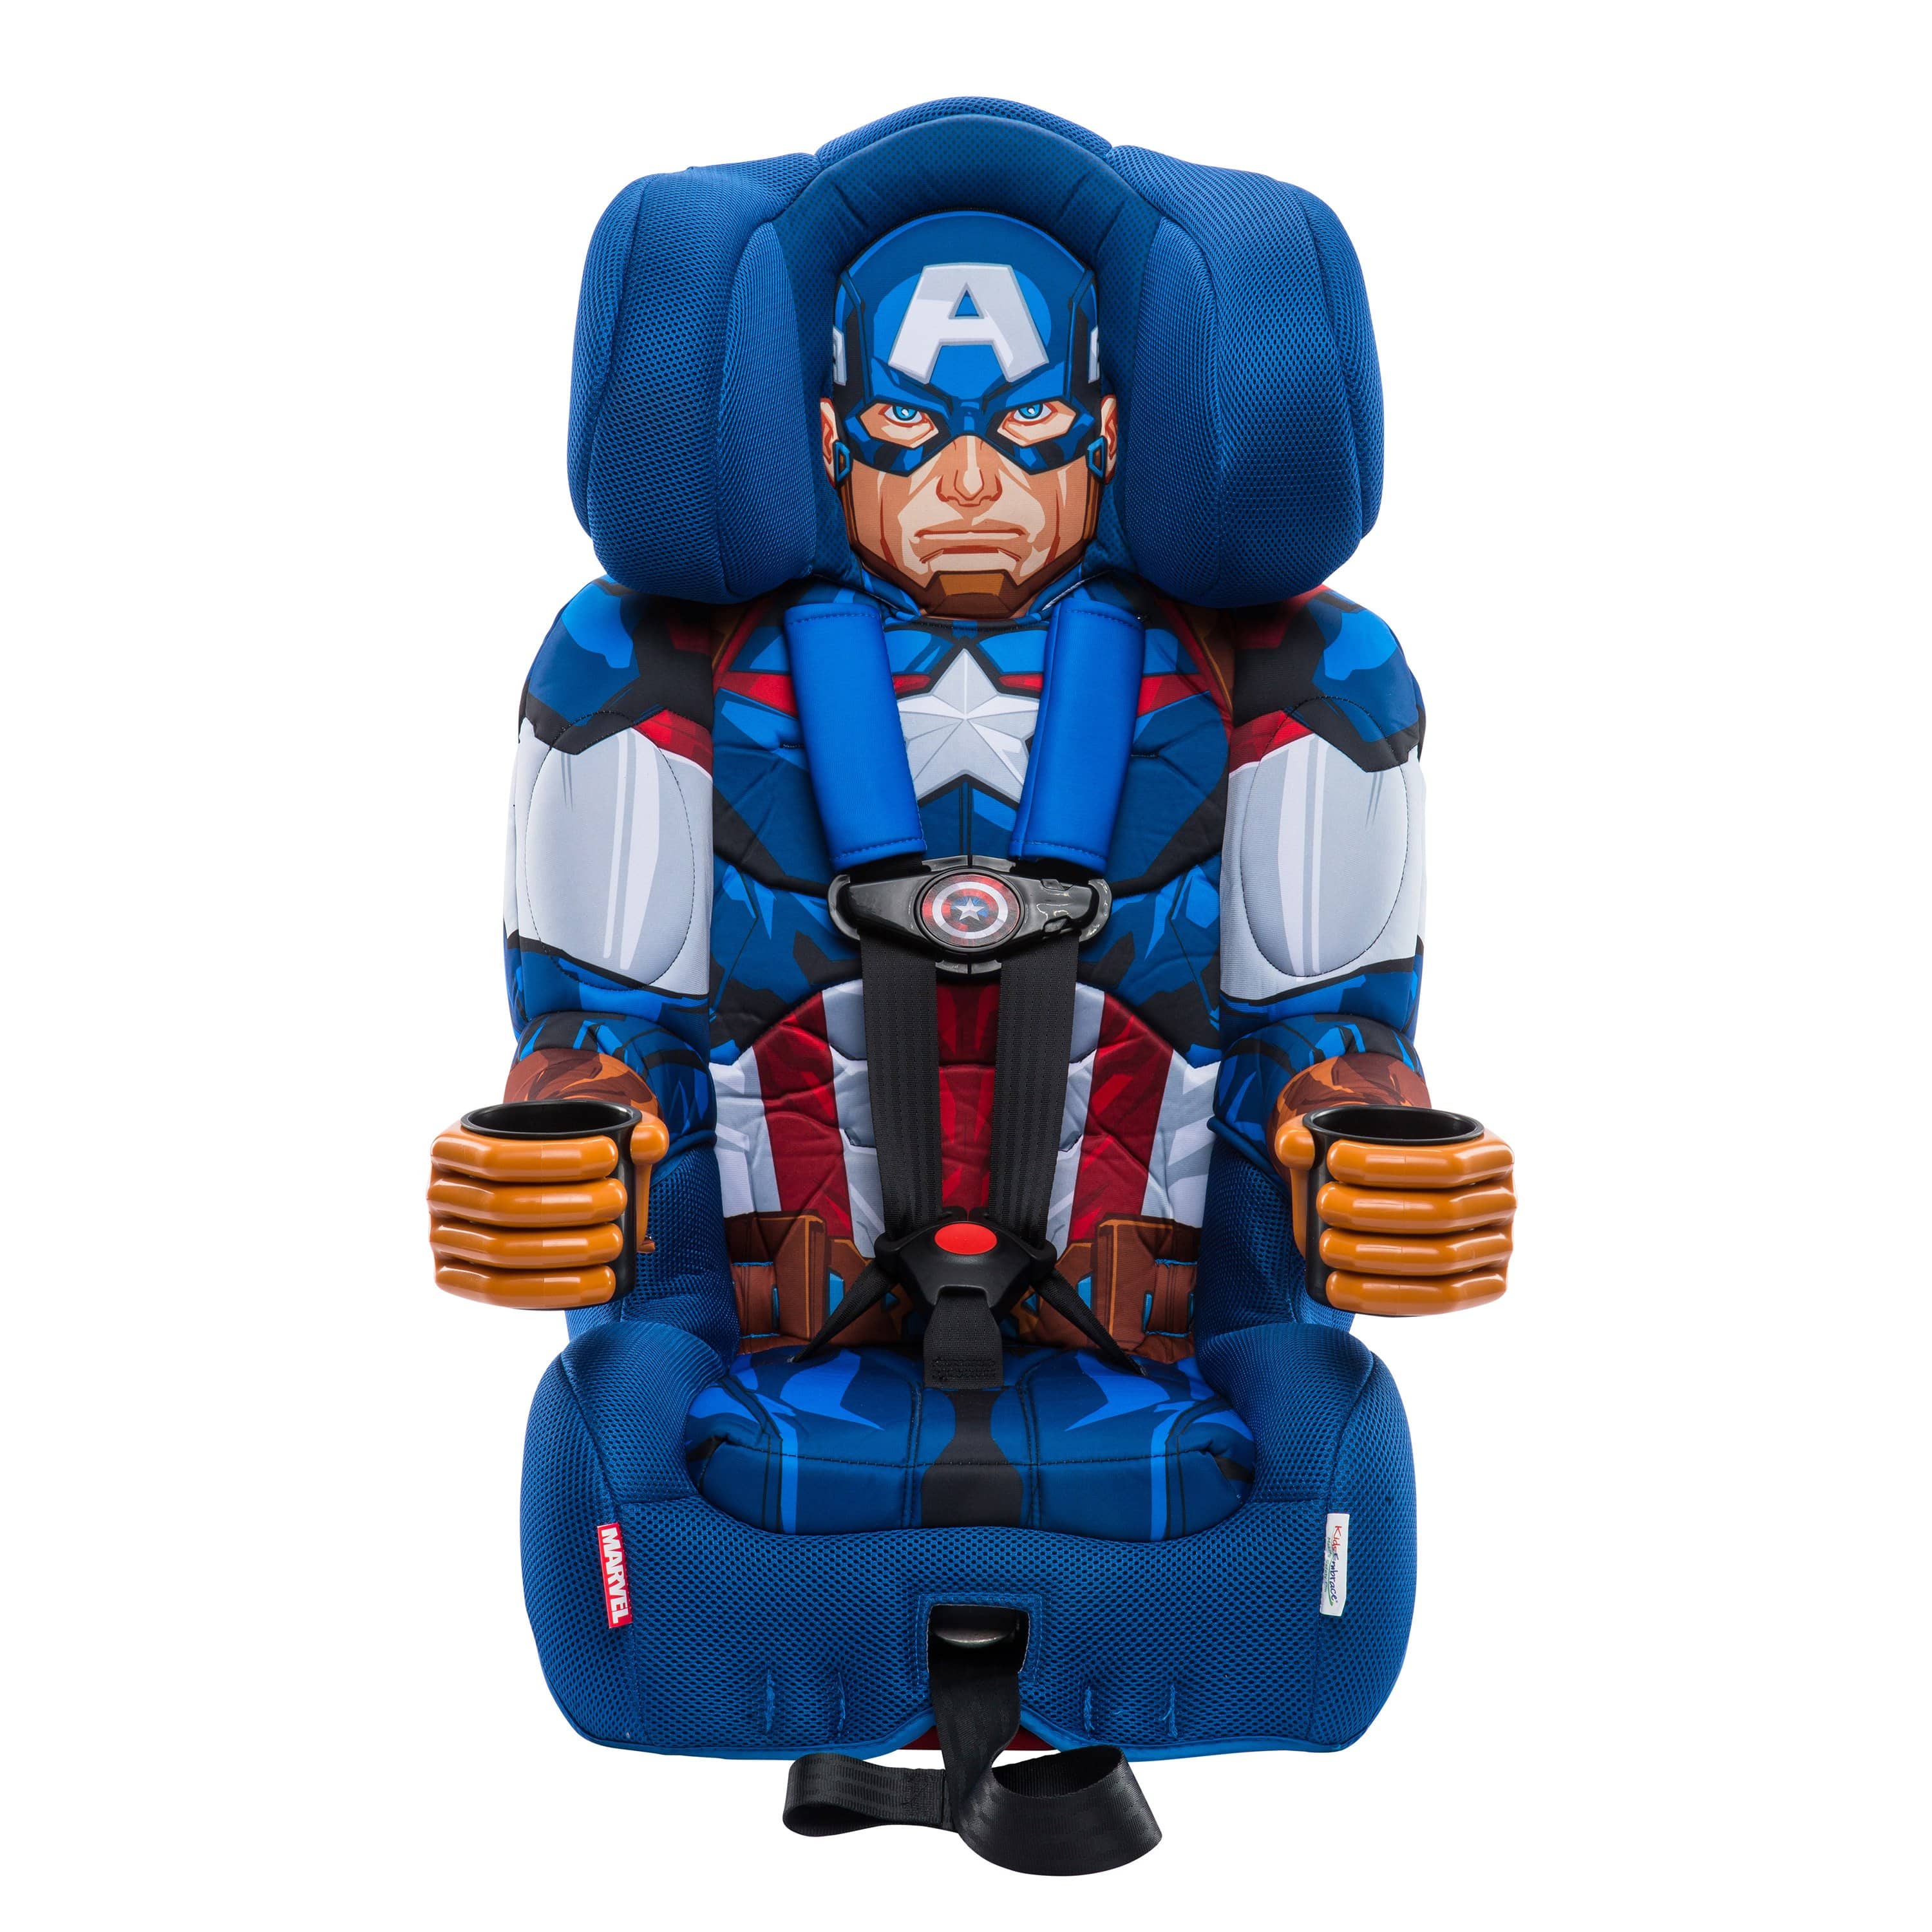 Captain America 2-in-1 Harness Booster Car Seat